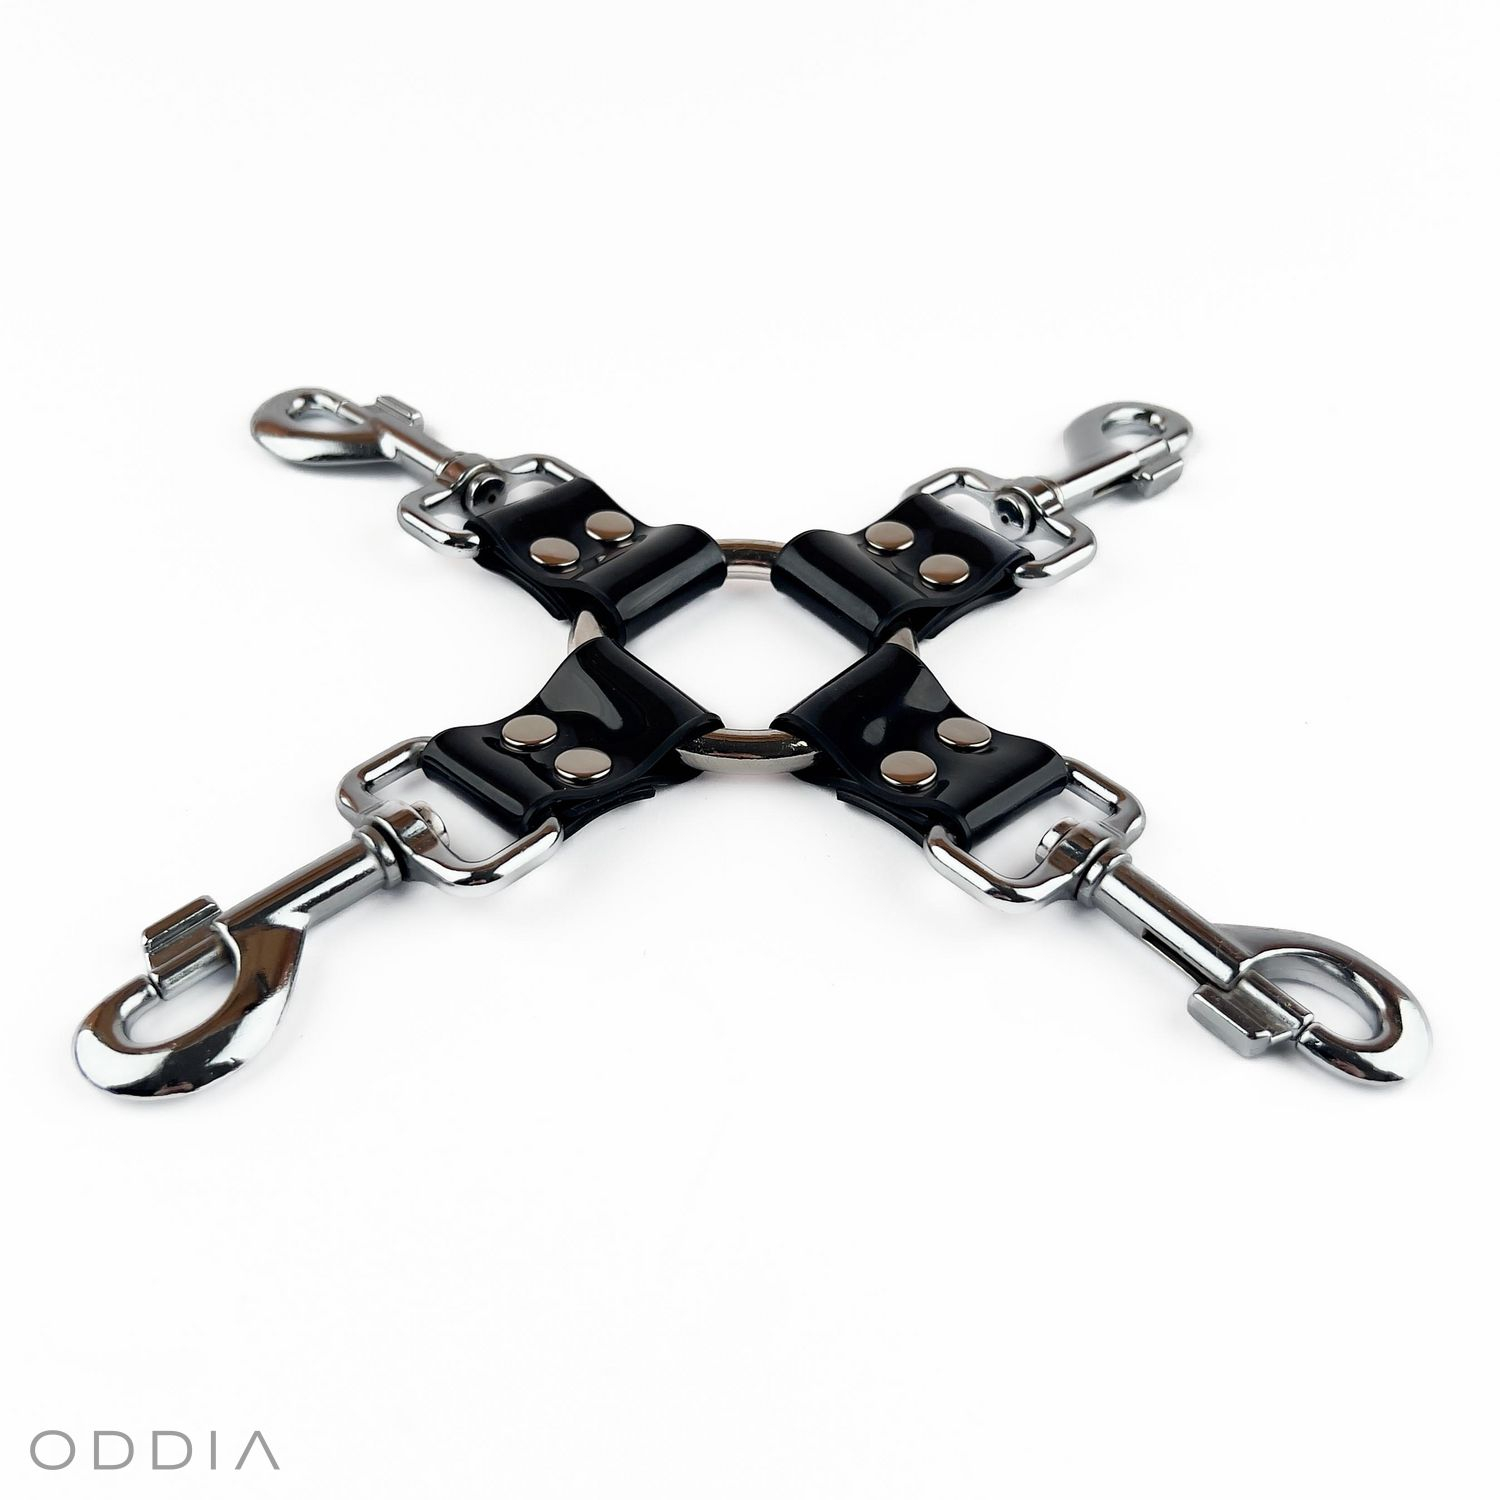 Black four-way bondage connector with carabiners